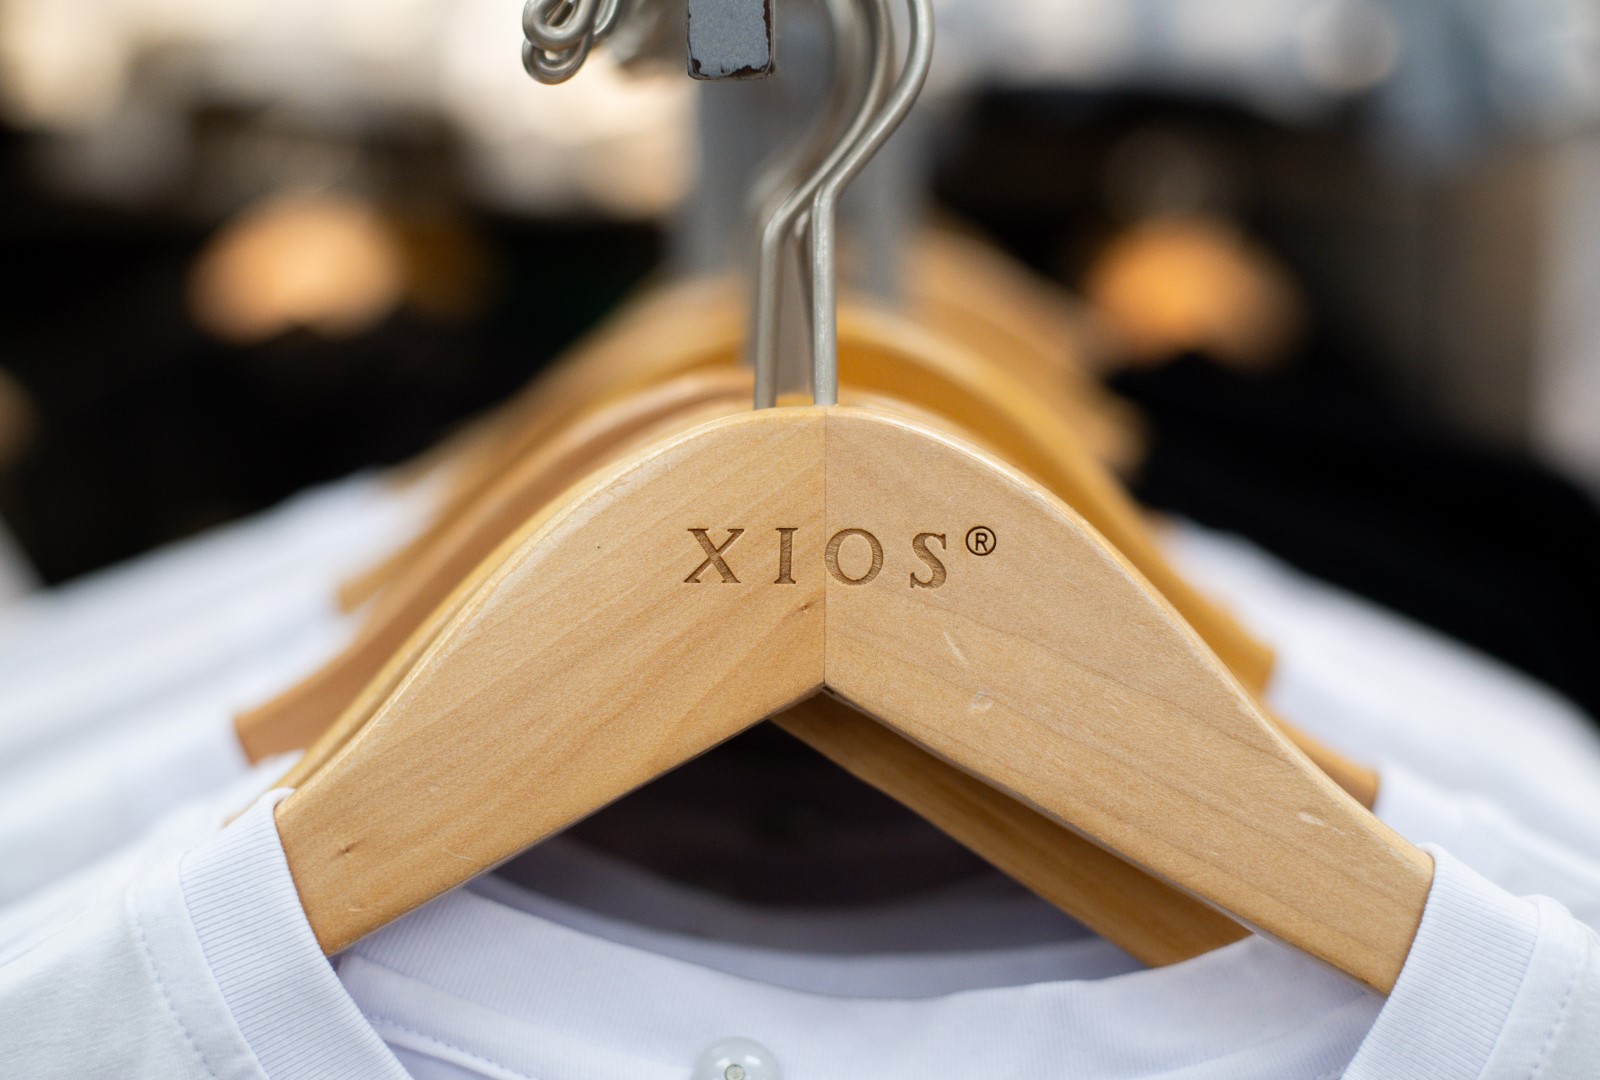 Close-up of a wooden hanger with the logo "xios" engraved, holding white shirts in focus, with a blurry background of additional clothes.